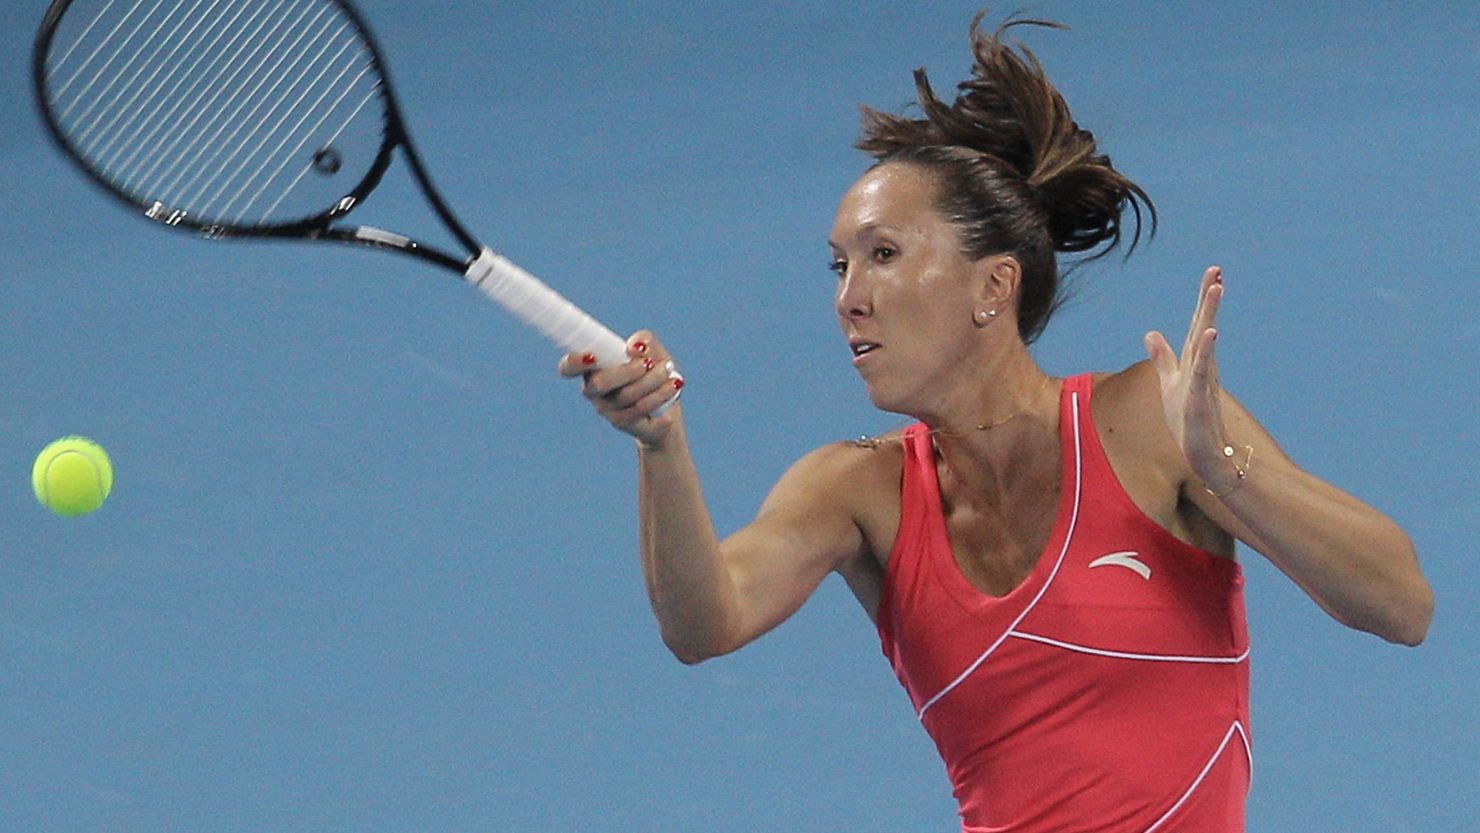 Serbia's Jelena Jankovic rose to the top of the women's world rankings in August 2008.